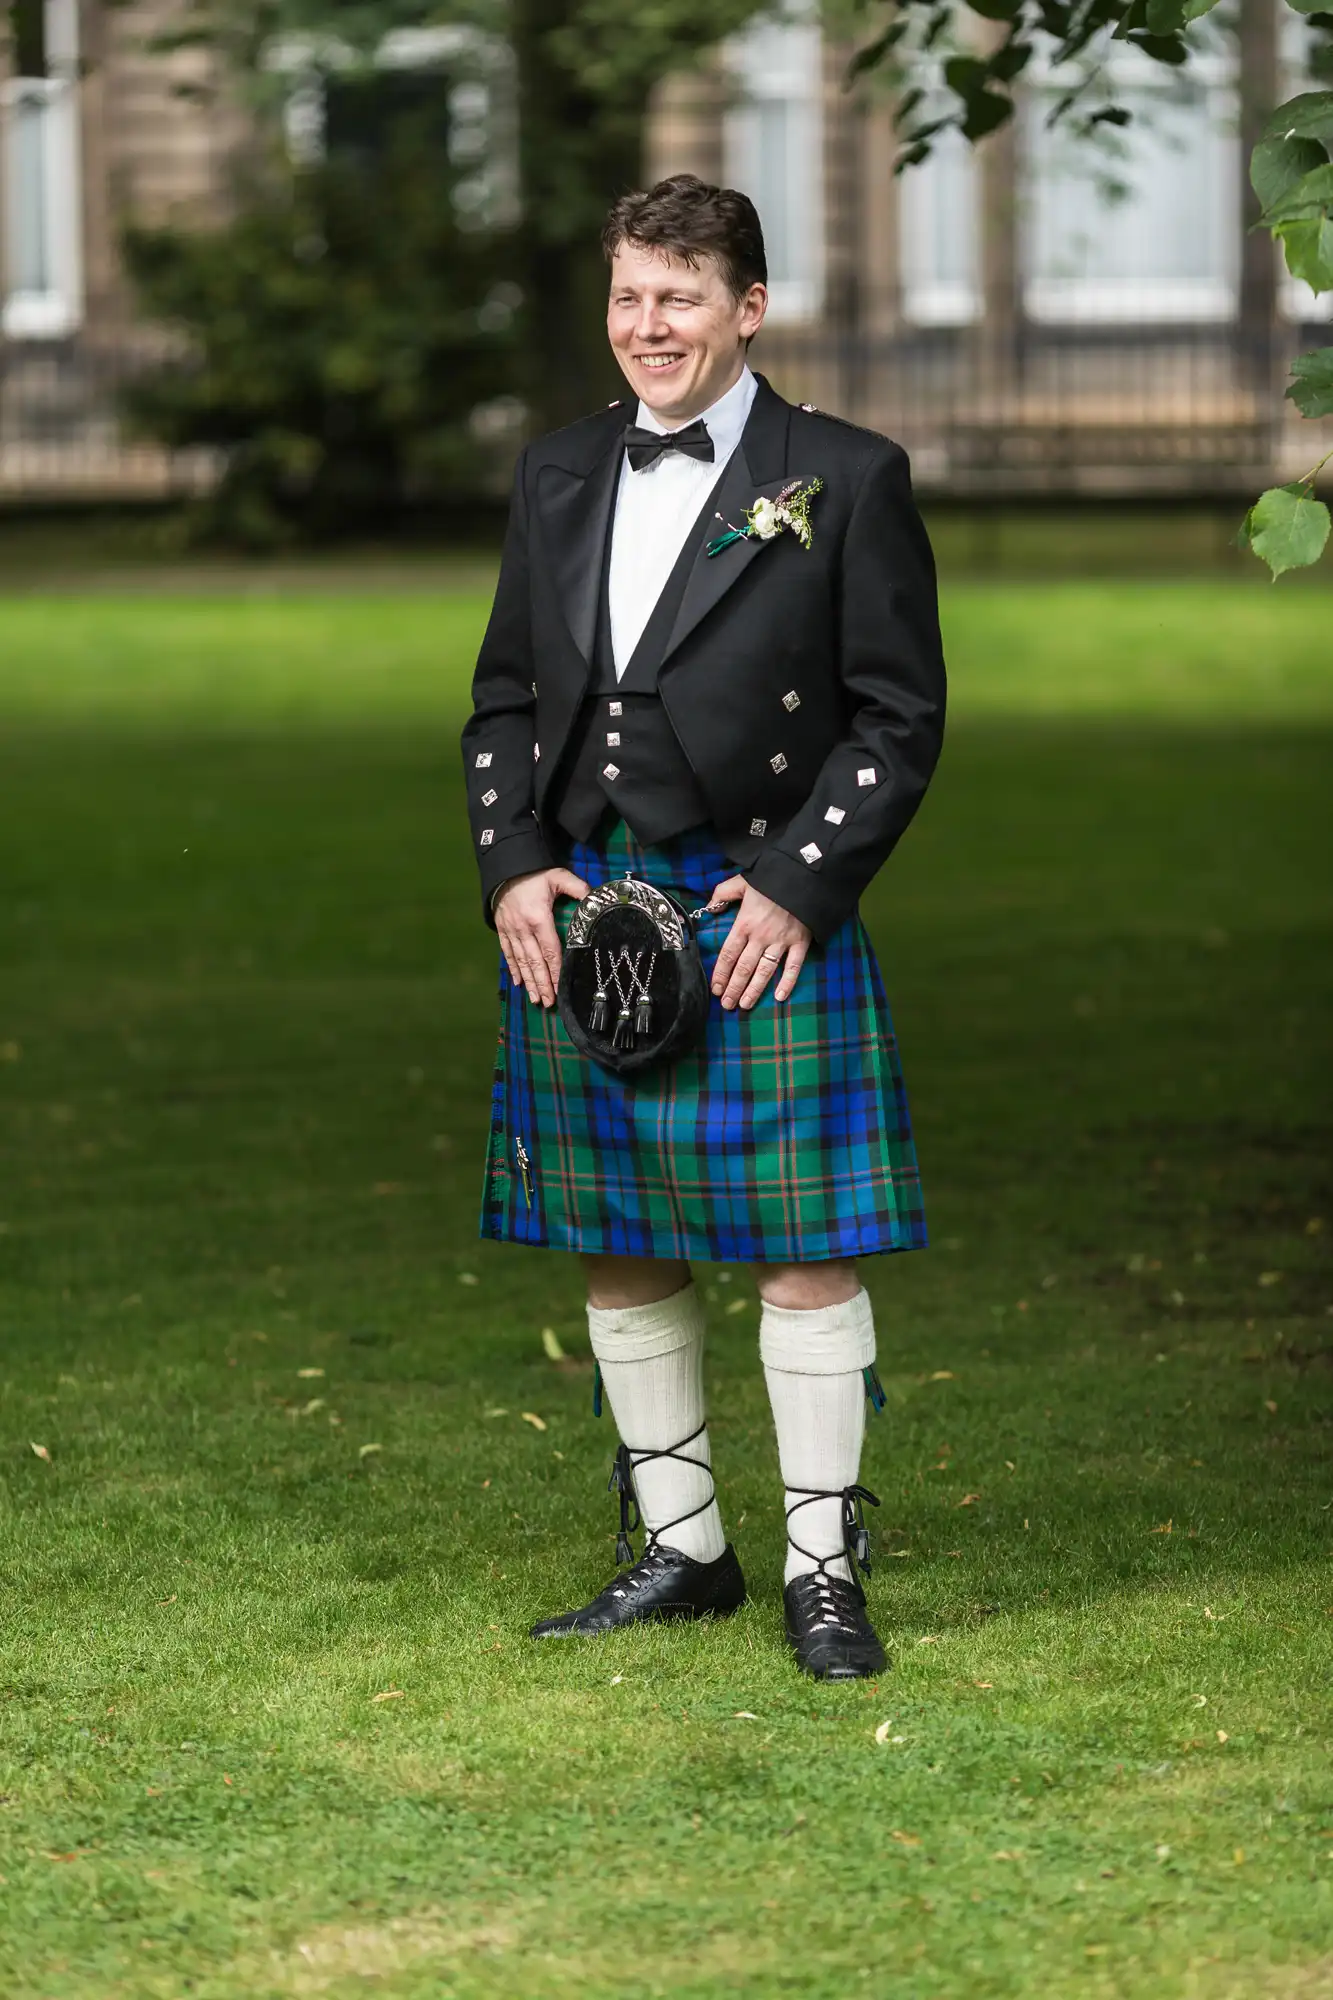 A person standing on a grassy lawn wearing a traditional scottish outfit, including a kilt with a tartan pattern, sporran, and black jacket.